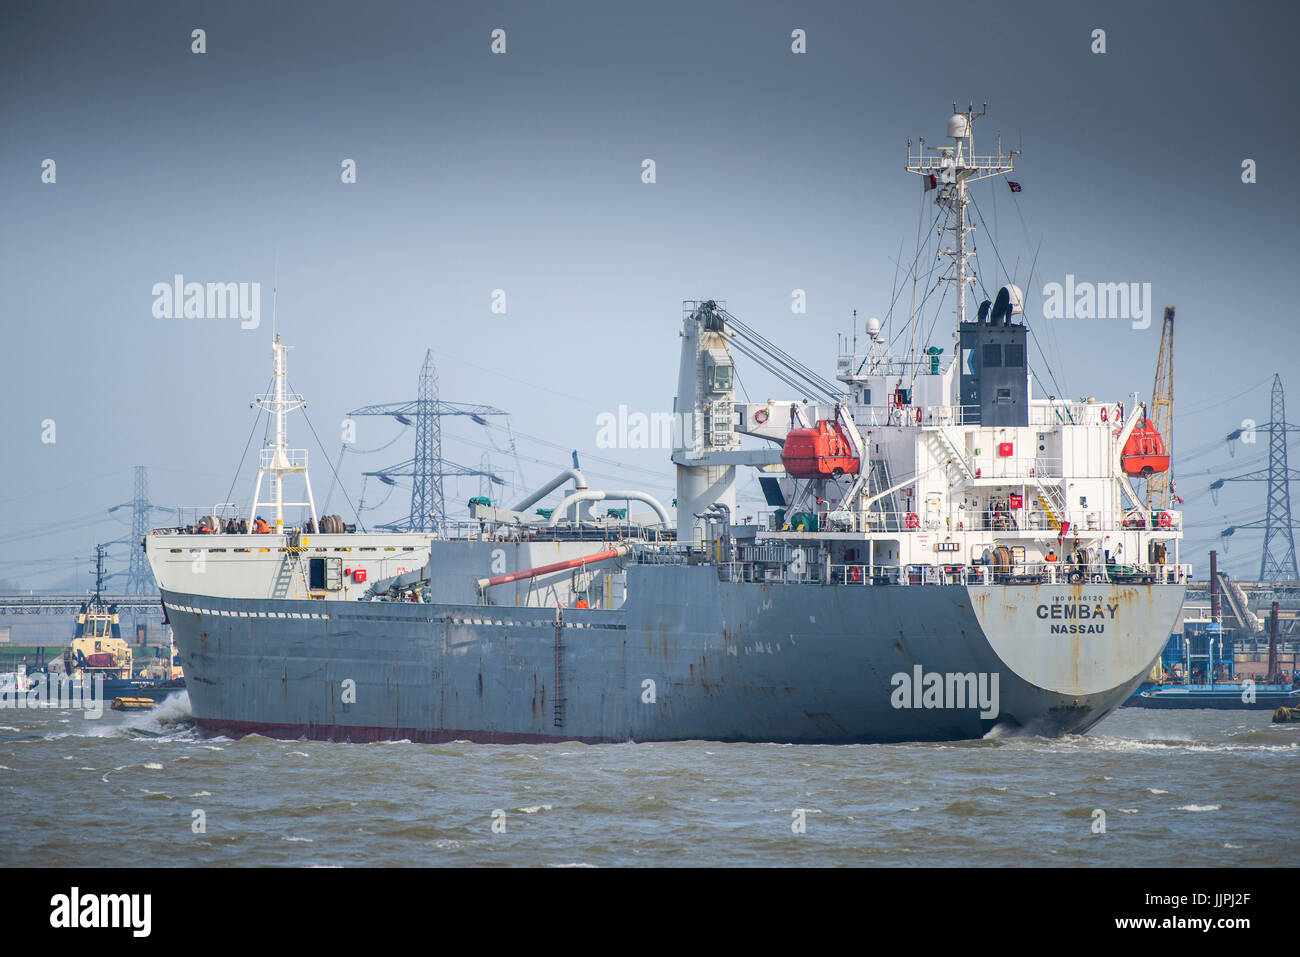 The cement carrier Cembay steams downriver on the River Thames. Stock Photo